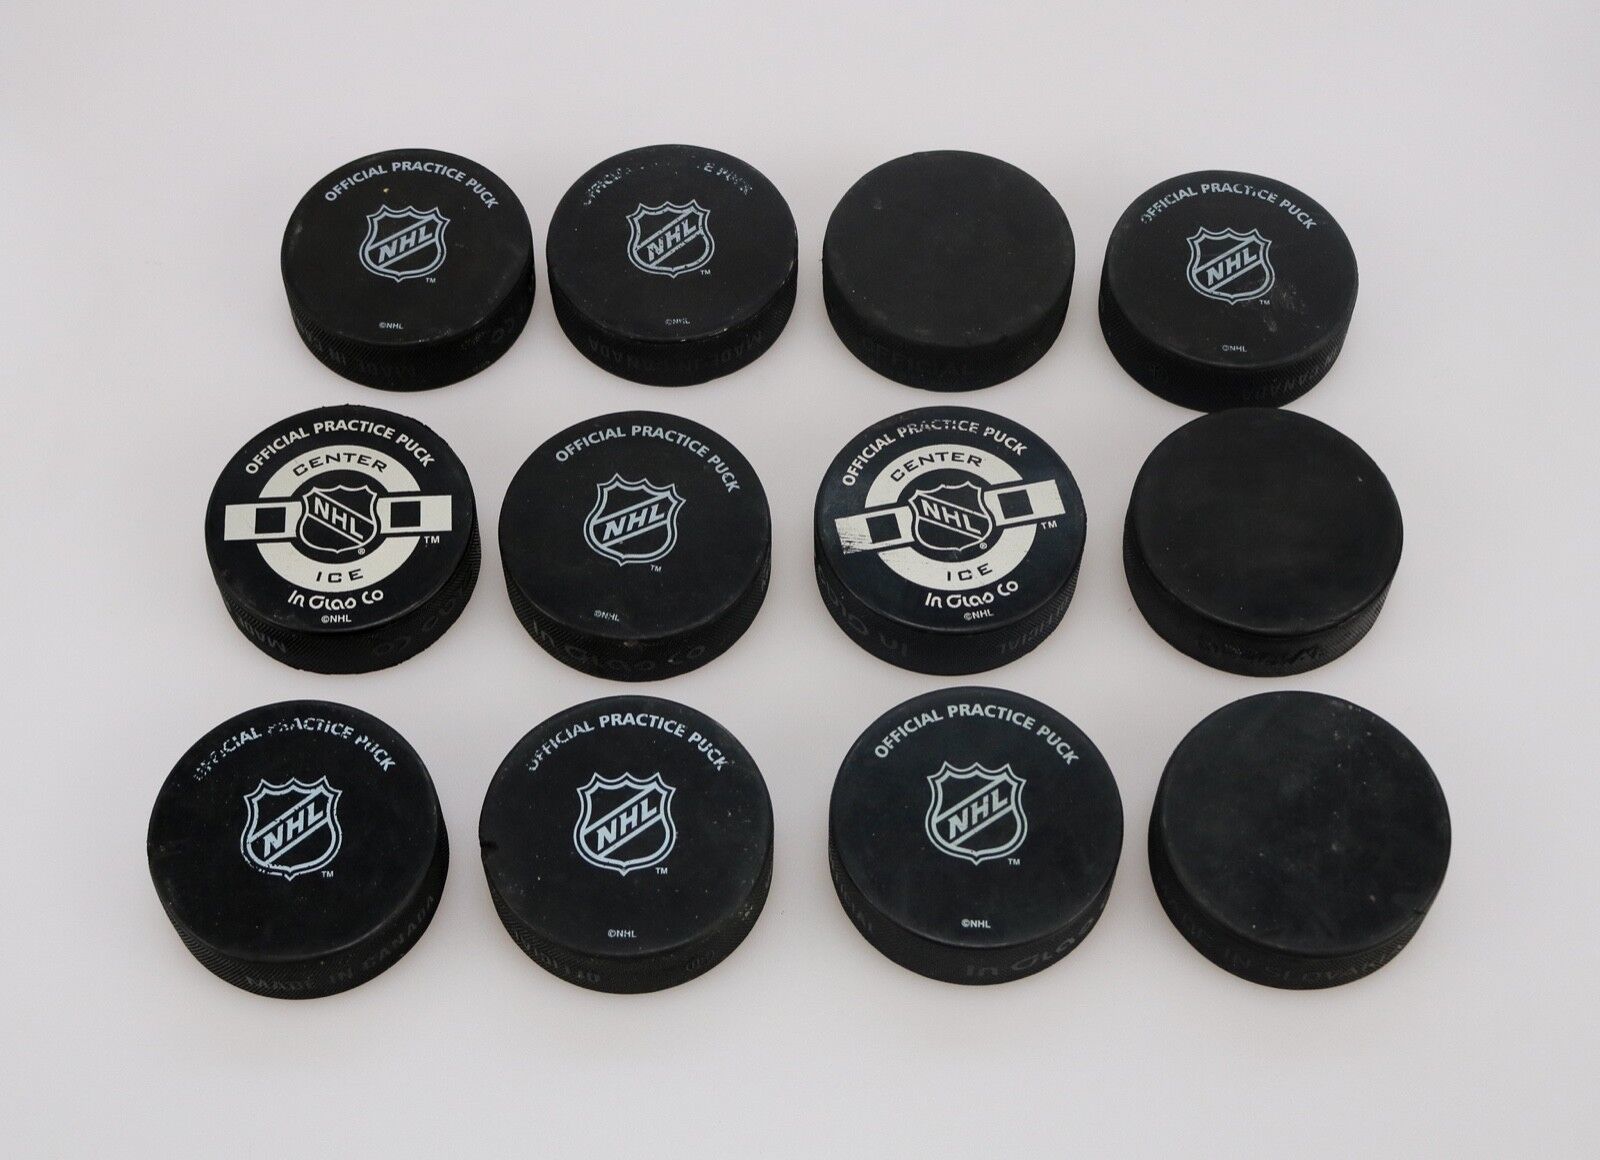  Hockey Official Practice Puck NHL Lot 12 Autograph Made in Canada InGlass Co InGlas Co. - фотография #3